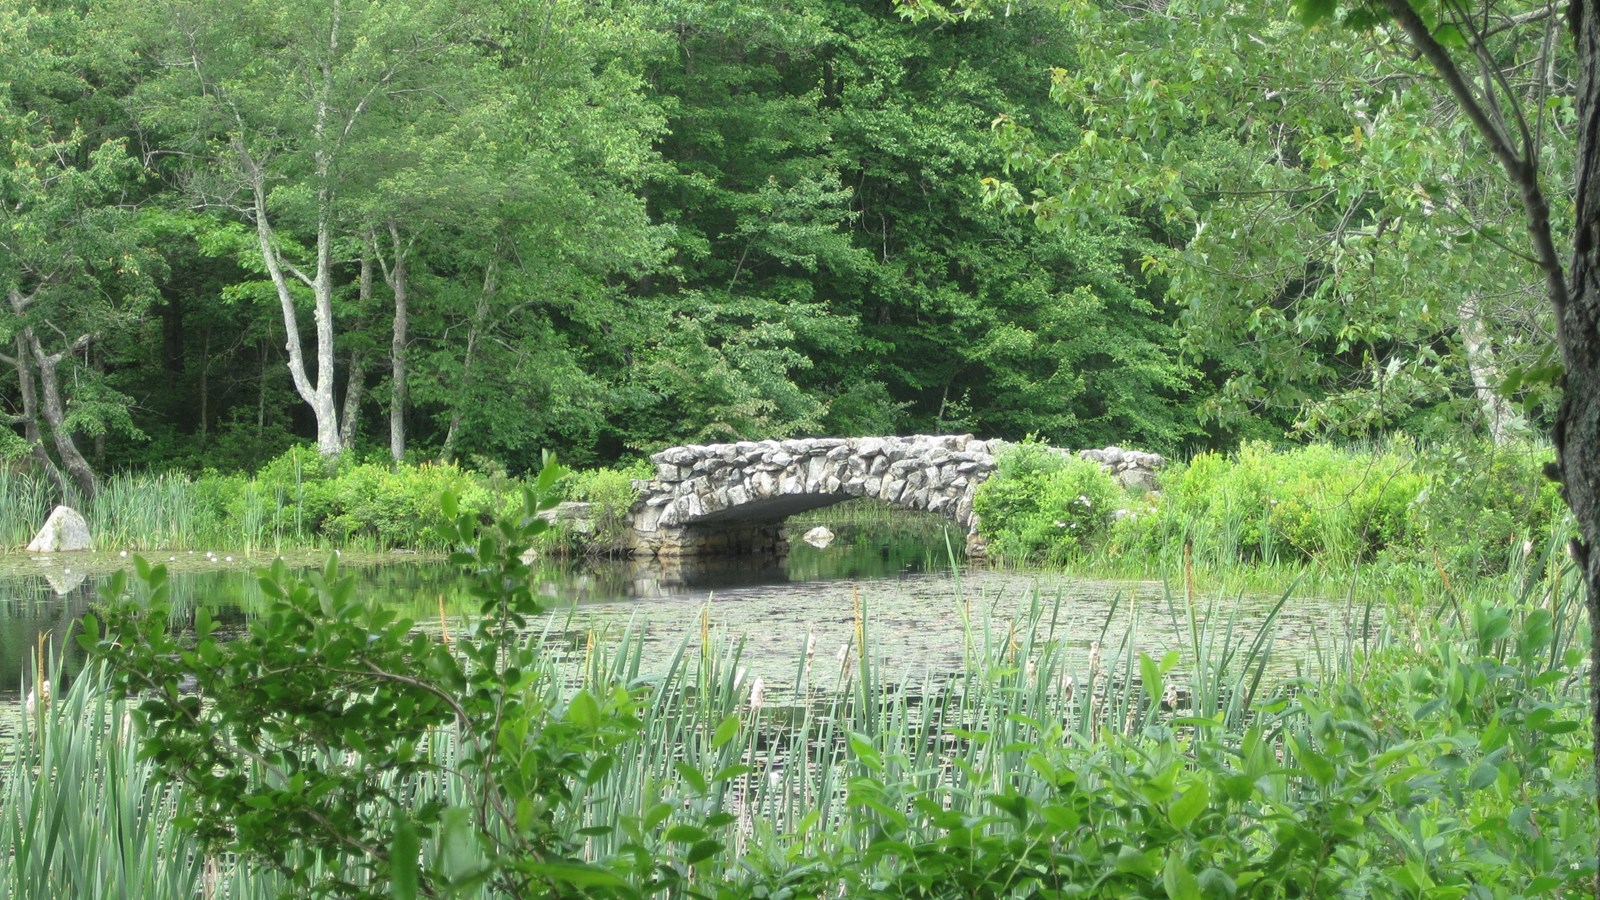 Stone arched bridge over water in Hopedale\'s Parklands